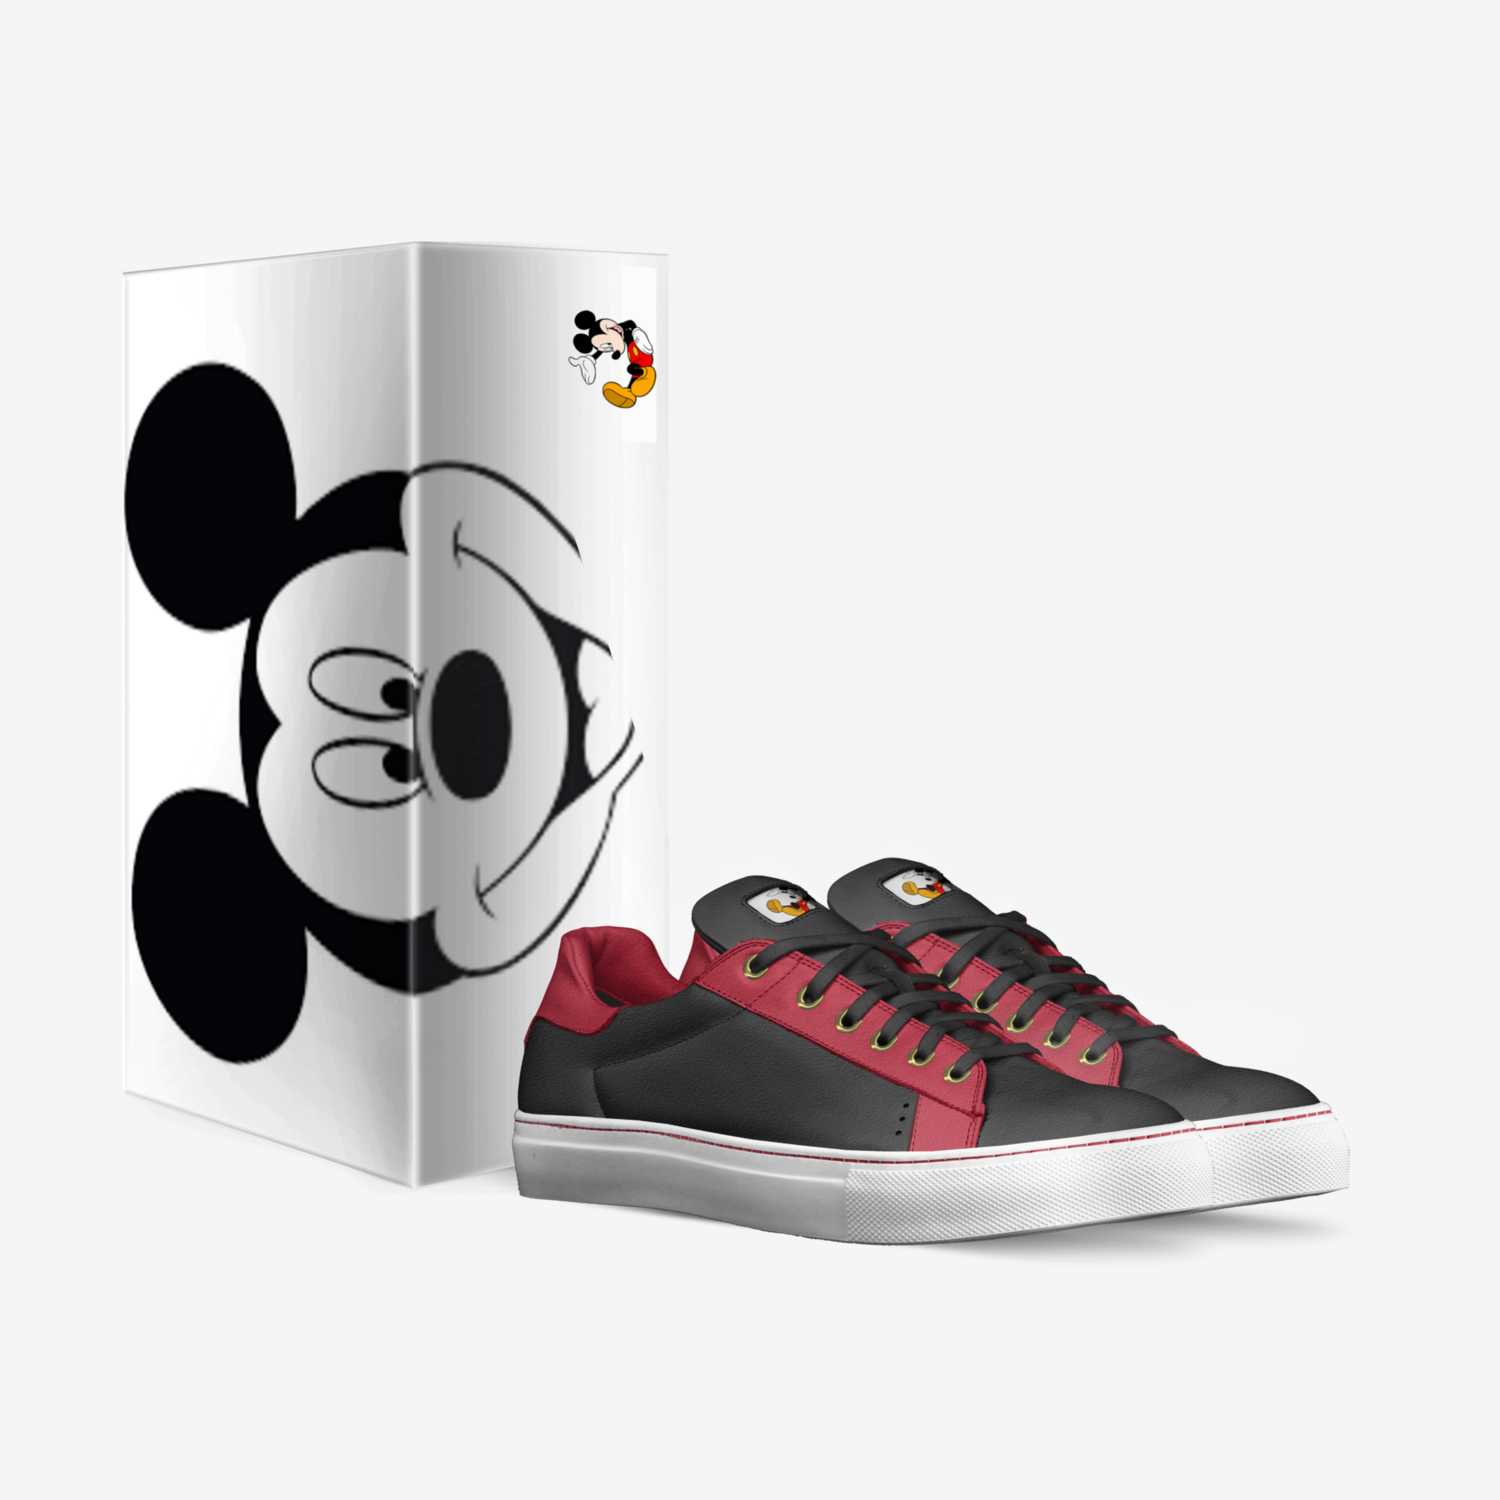 Mickey's custom made in Italy shoes by Shanon Gaskins | Box view